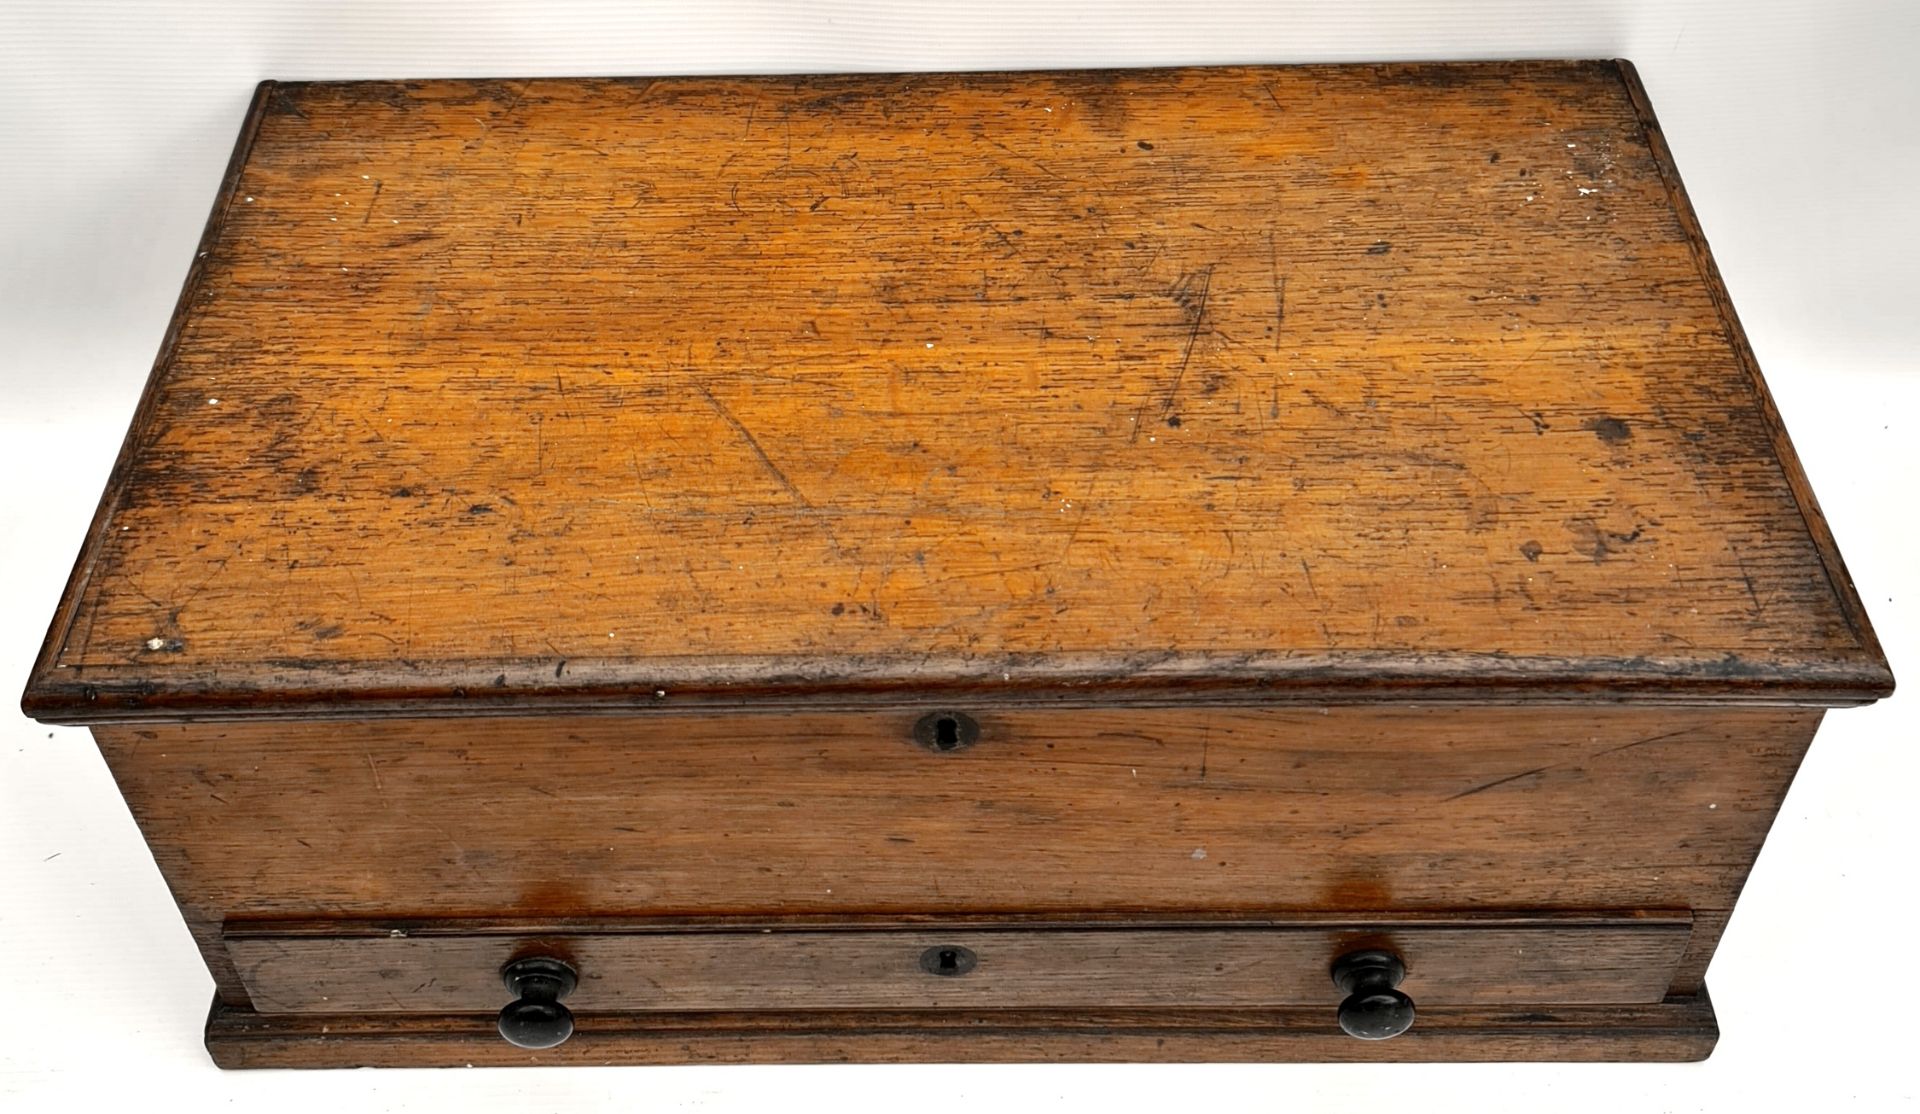 Antique Oak Wooden Tool Chest With Iron Handles - Image 2 of 3